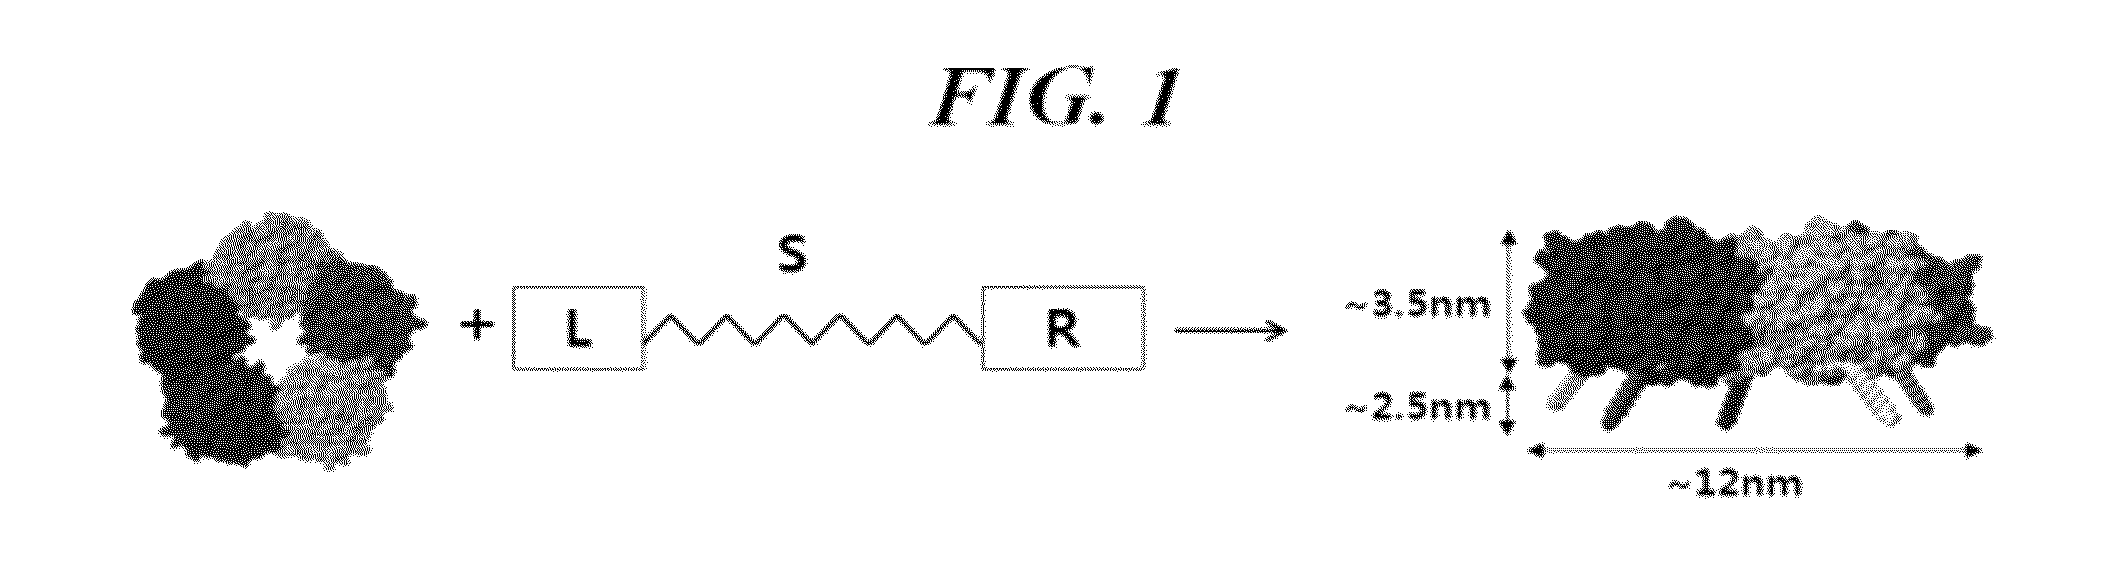 Molecularly imprinted polymer for detecting the pentraxin, and method for preparing same